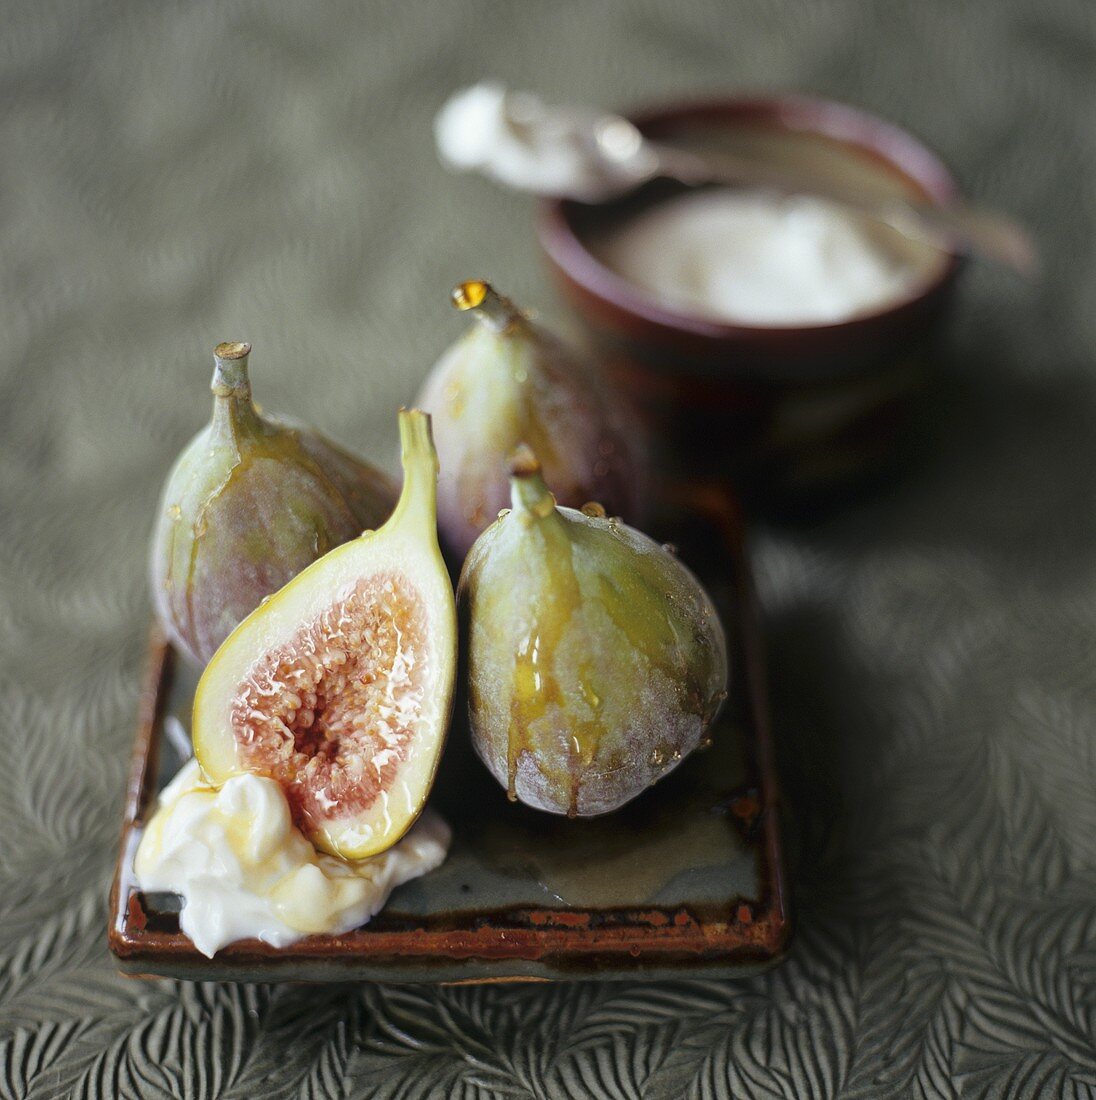 Fresh figs with yoghurt and honey